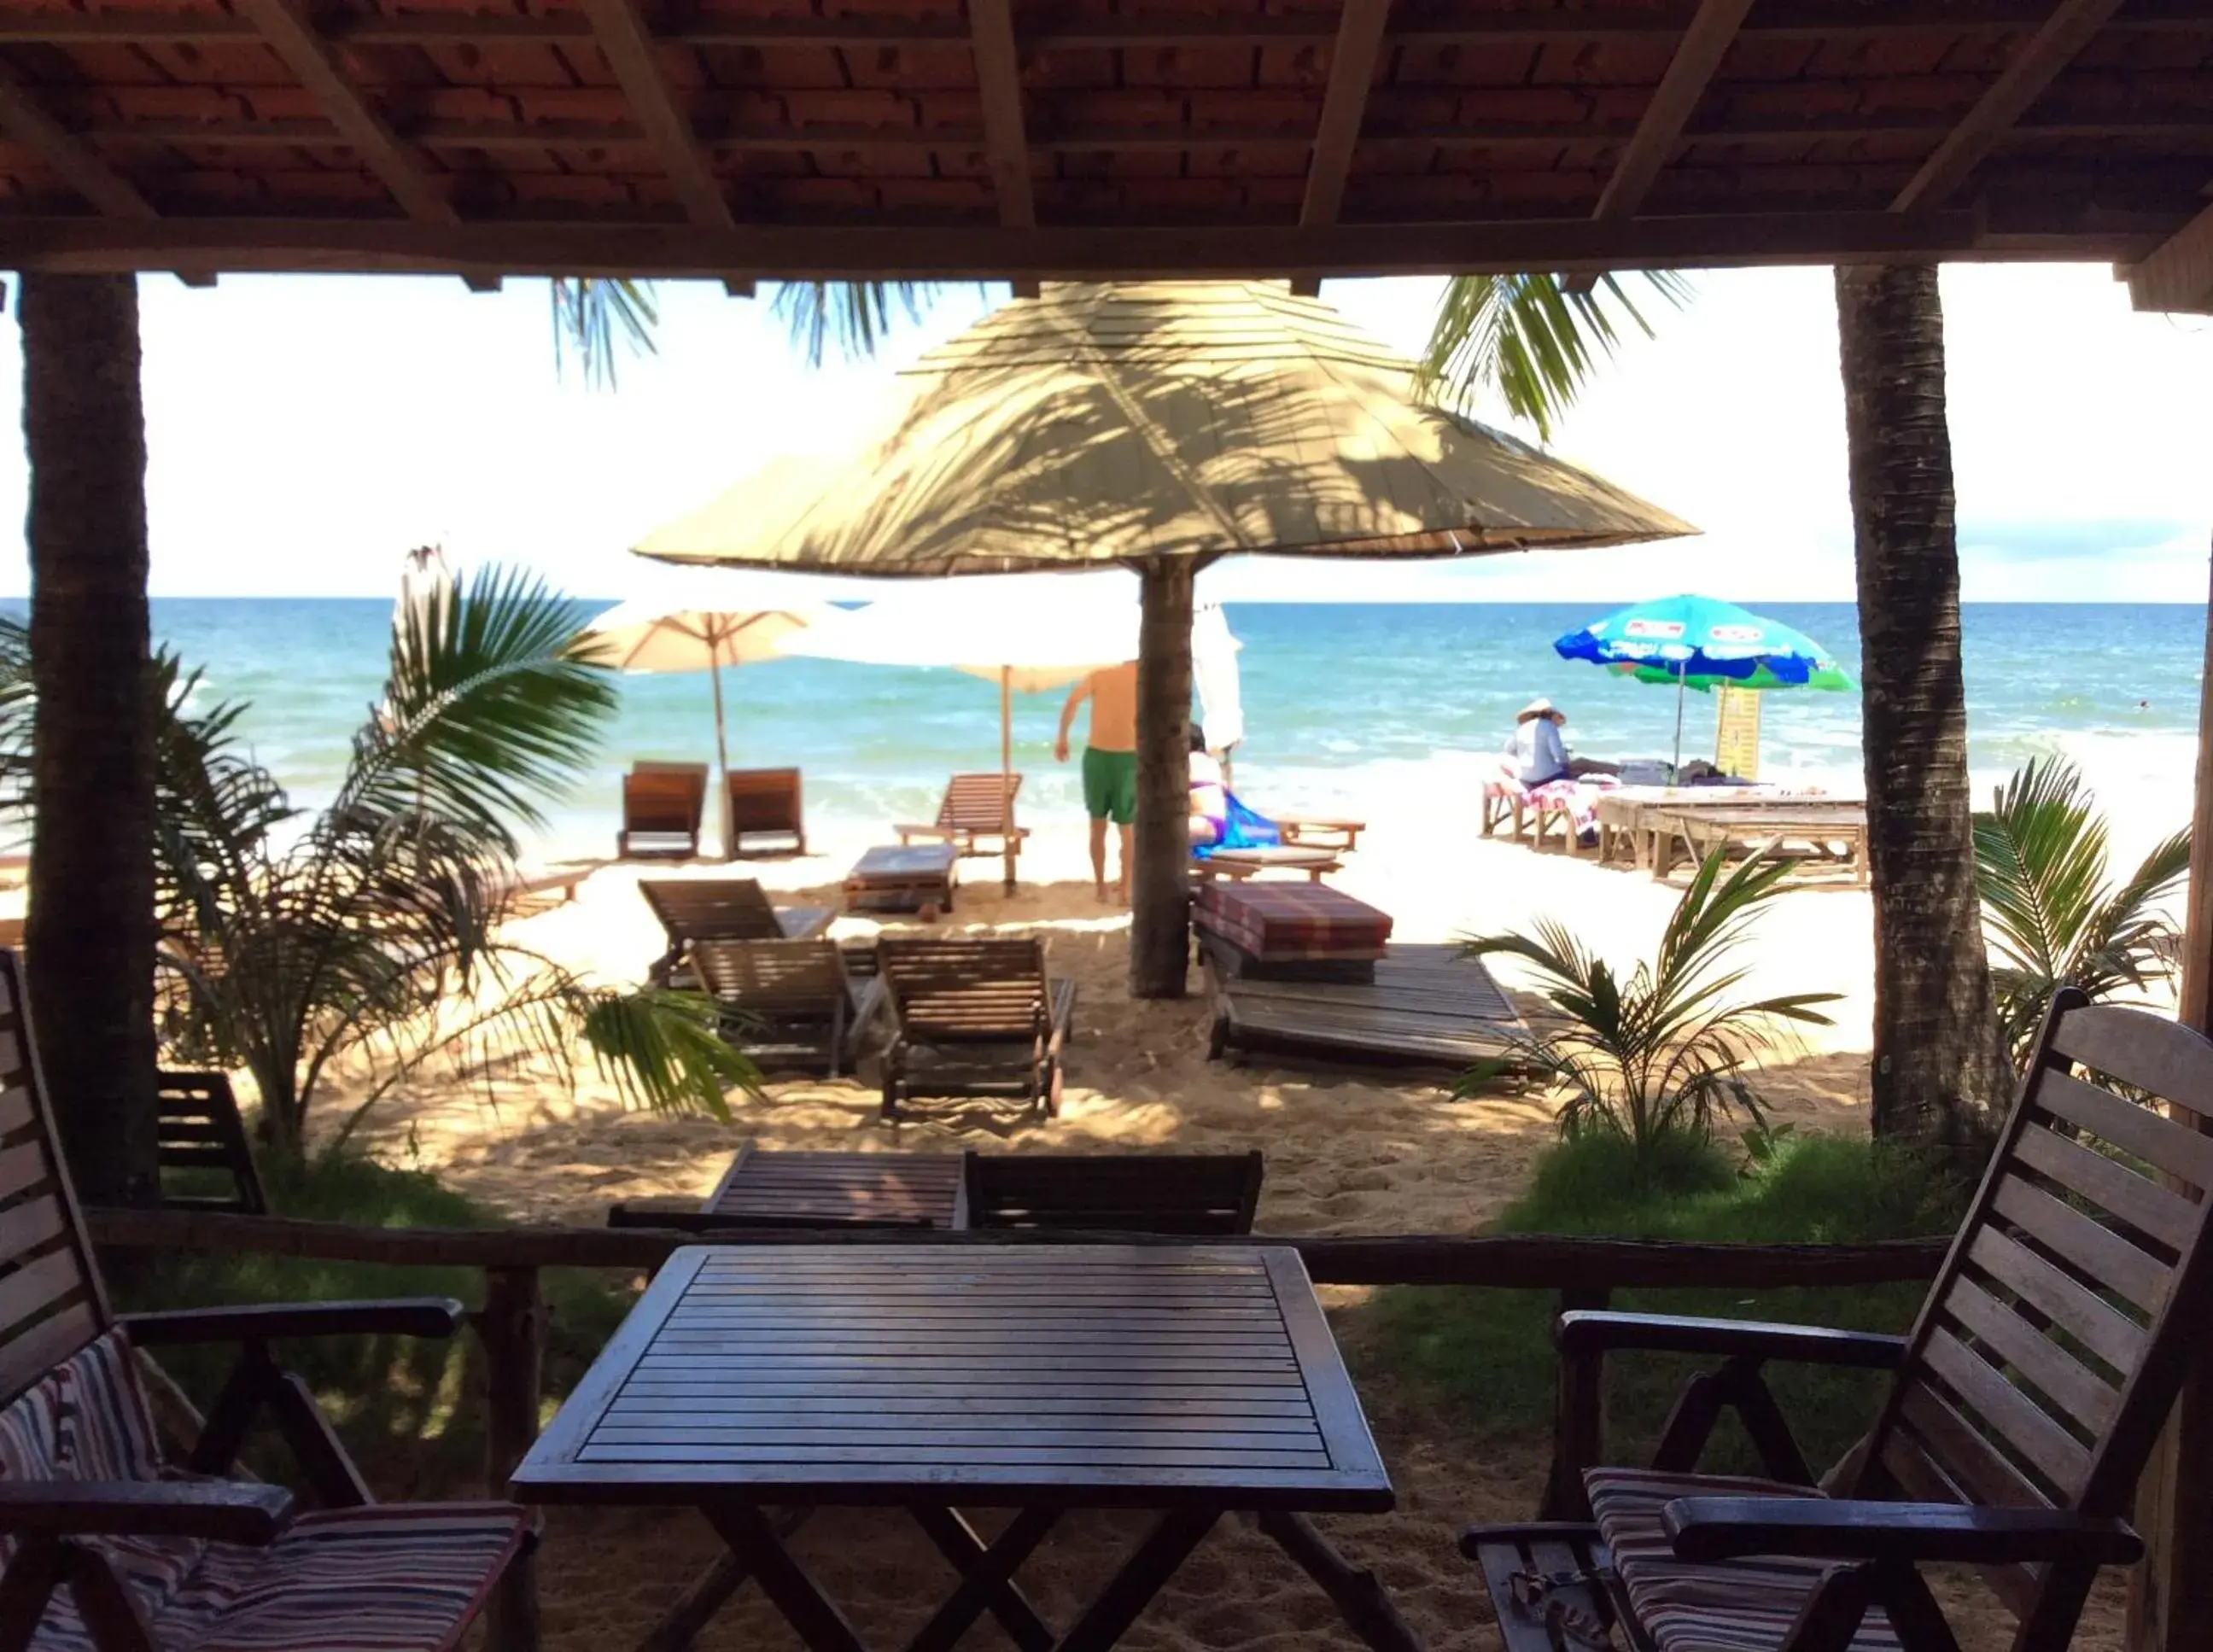 Sea view in Phu Quoc Kim - Bungalow On The Beach